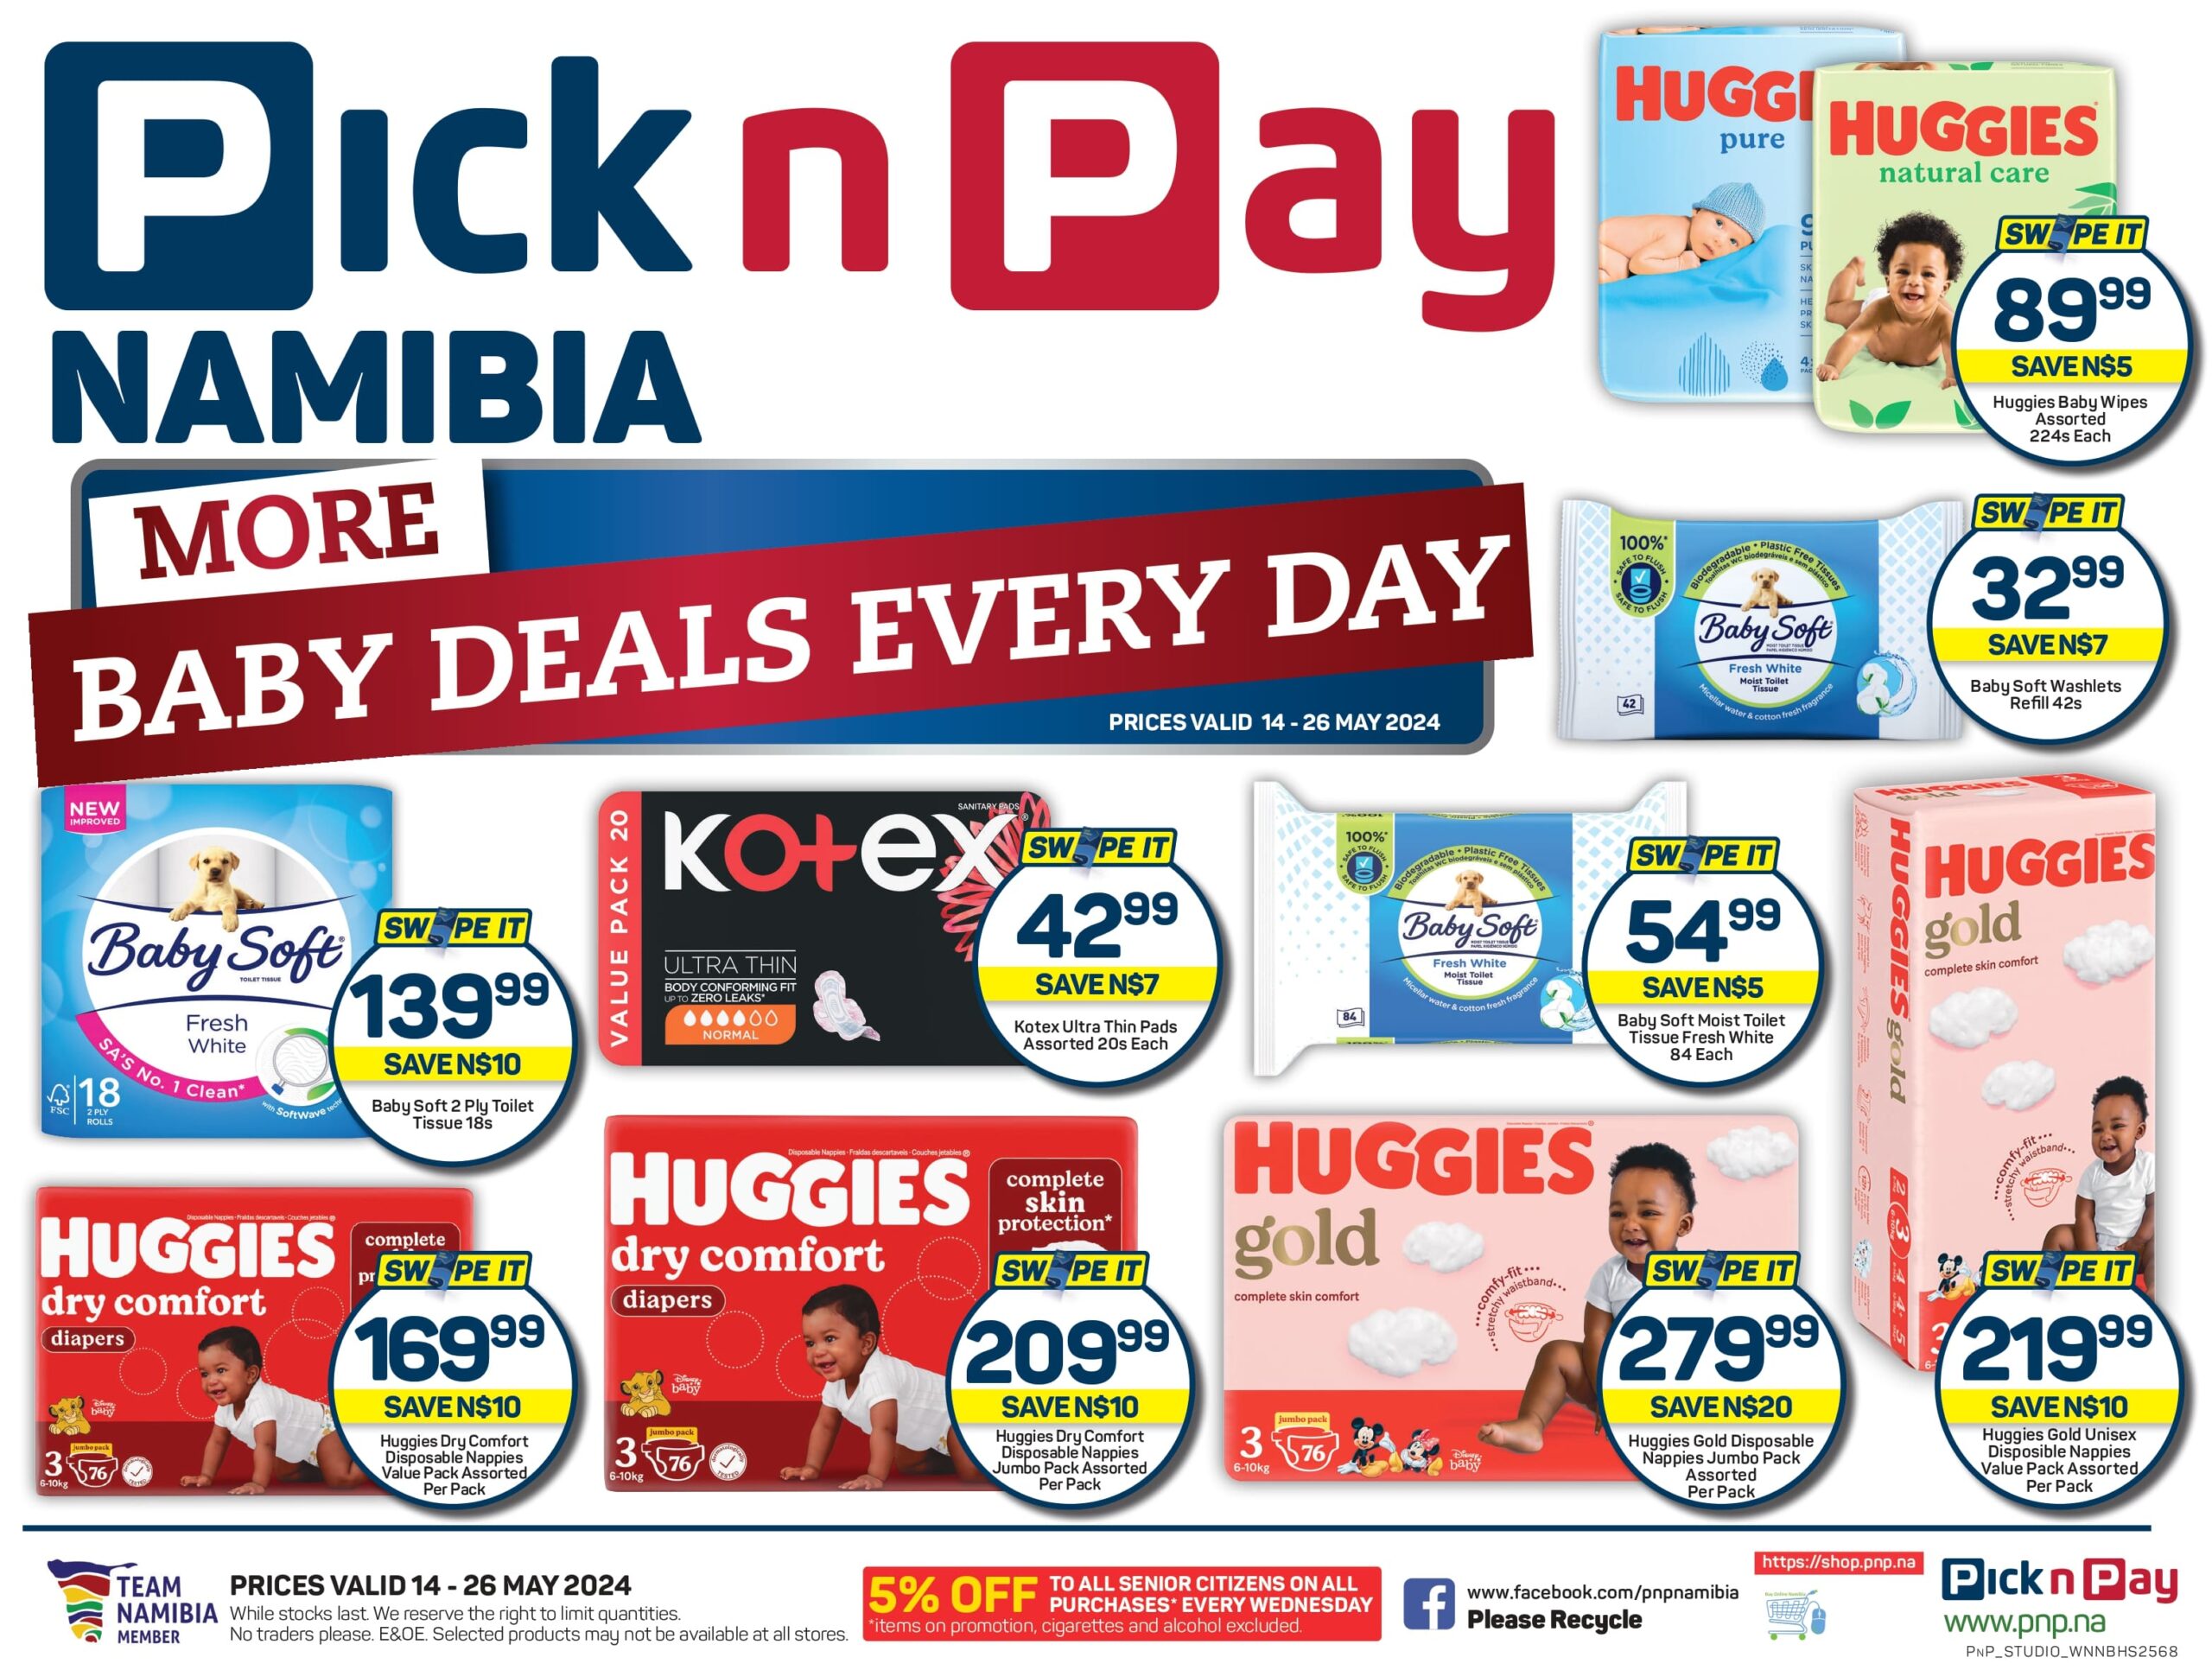 More baby deals everday PNP Namibia